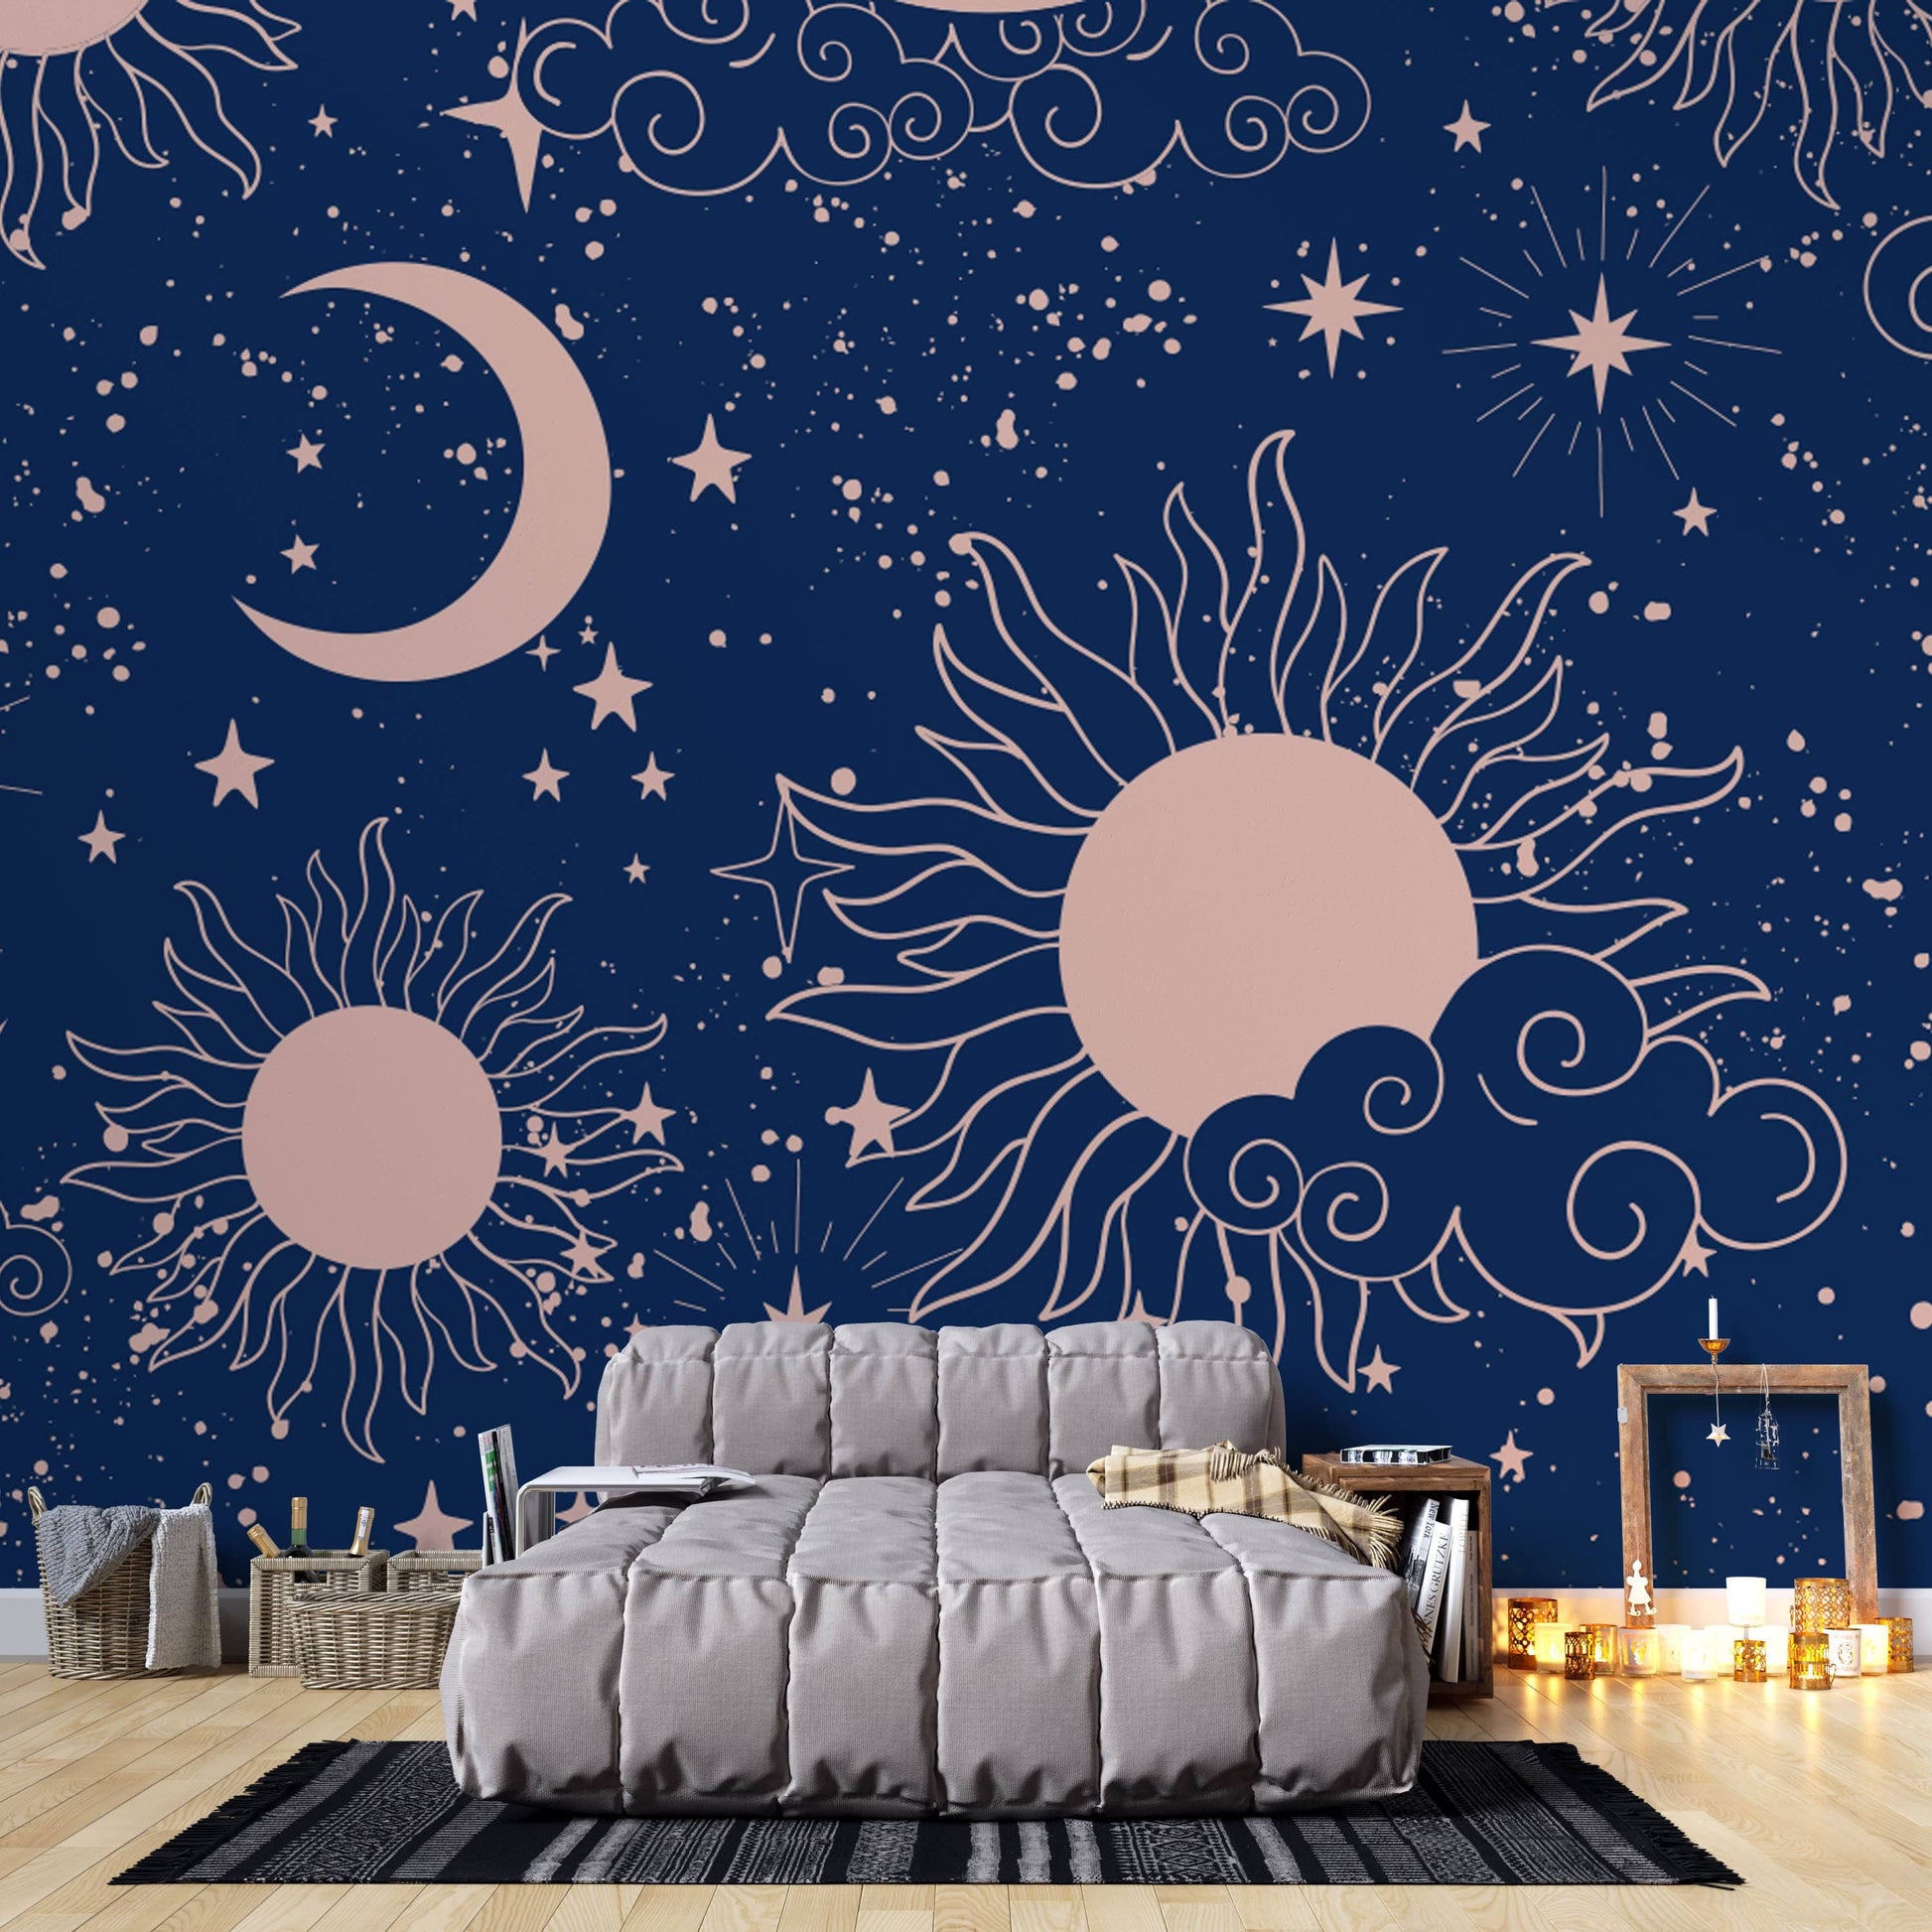 Mural depicting the solar system painted on wallpaper for use in children's bedrooms